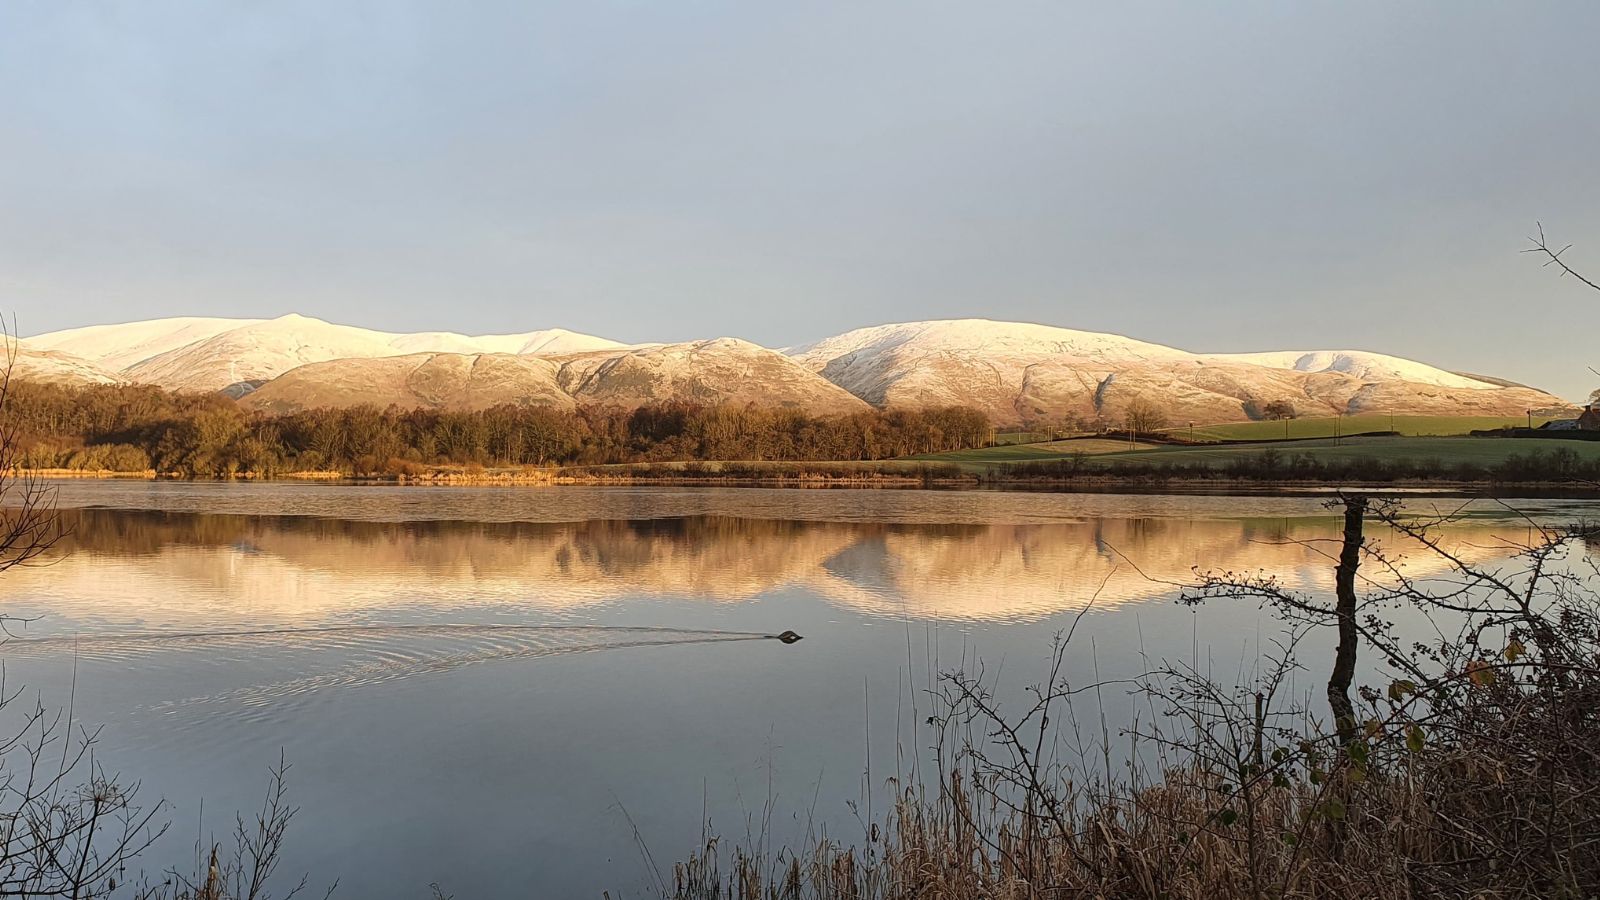 View across the water at Gartmorn Dam. The water is flat calm and the hills in the background have a light dusting of snow.